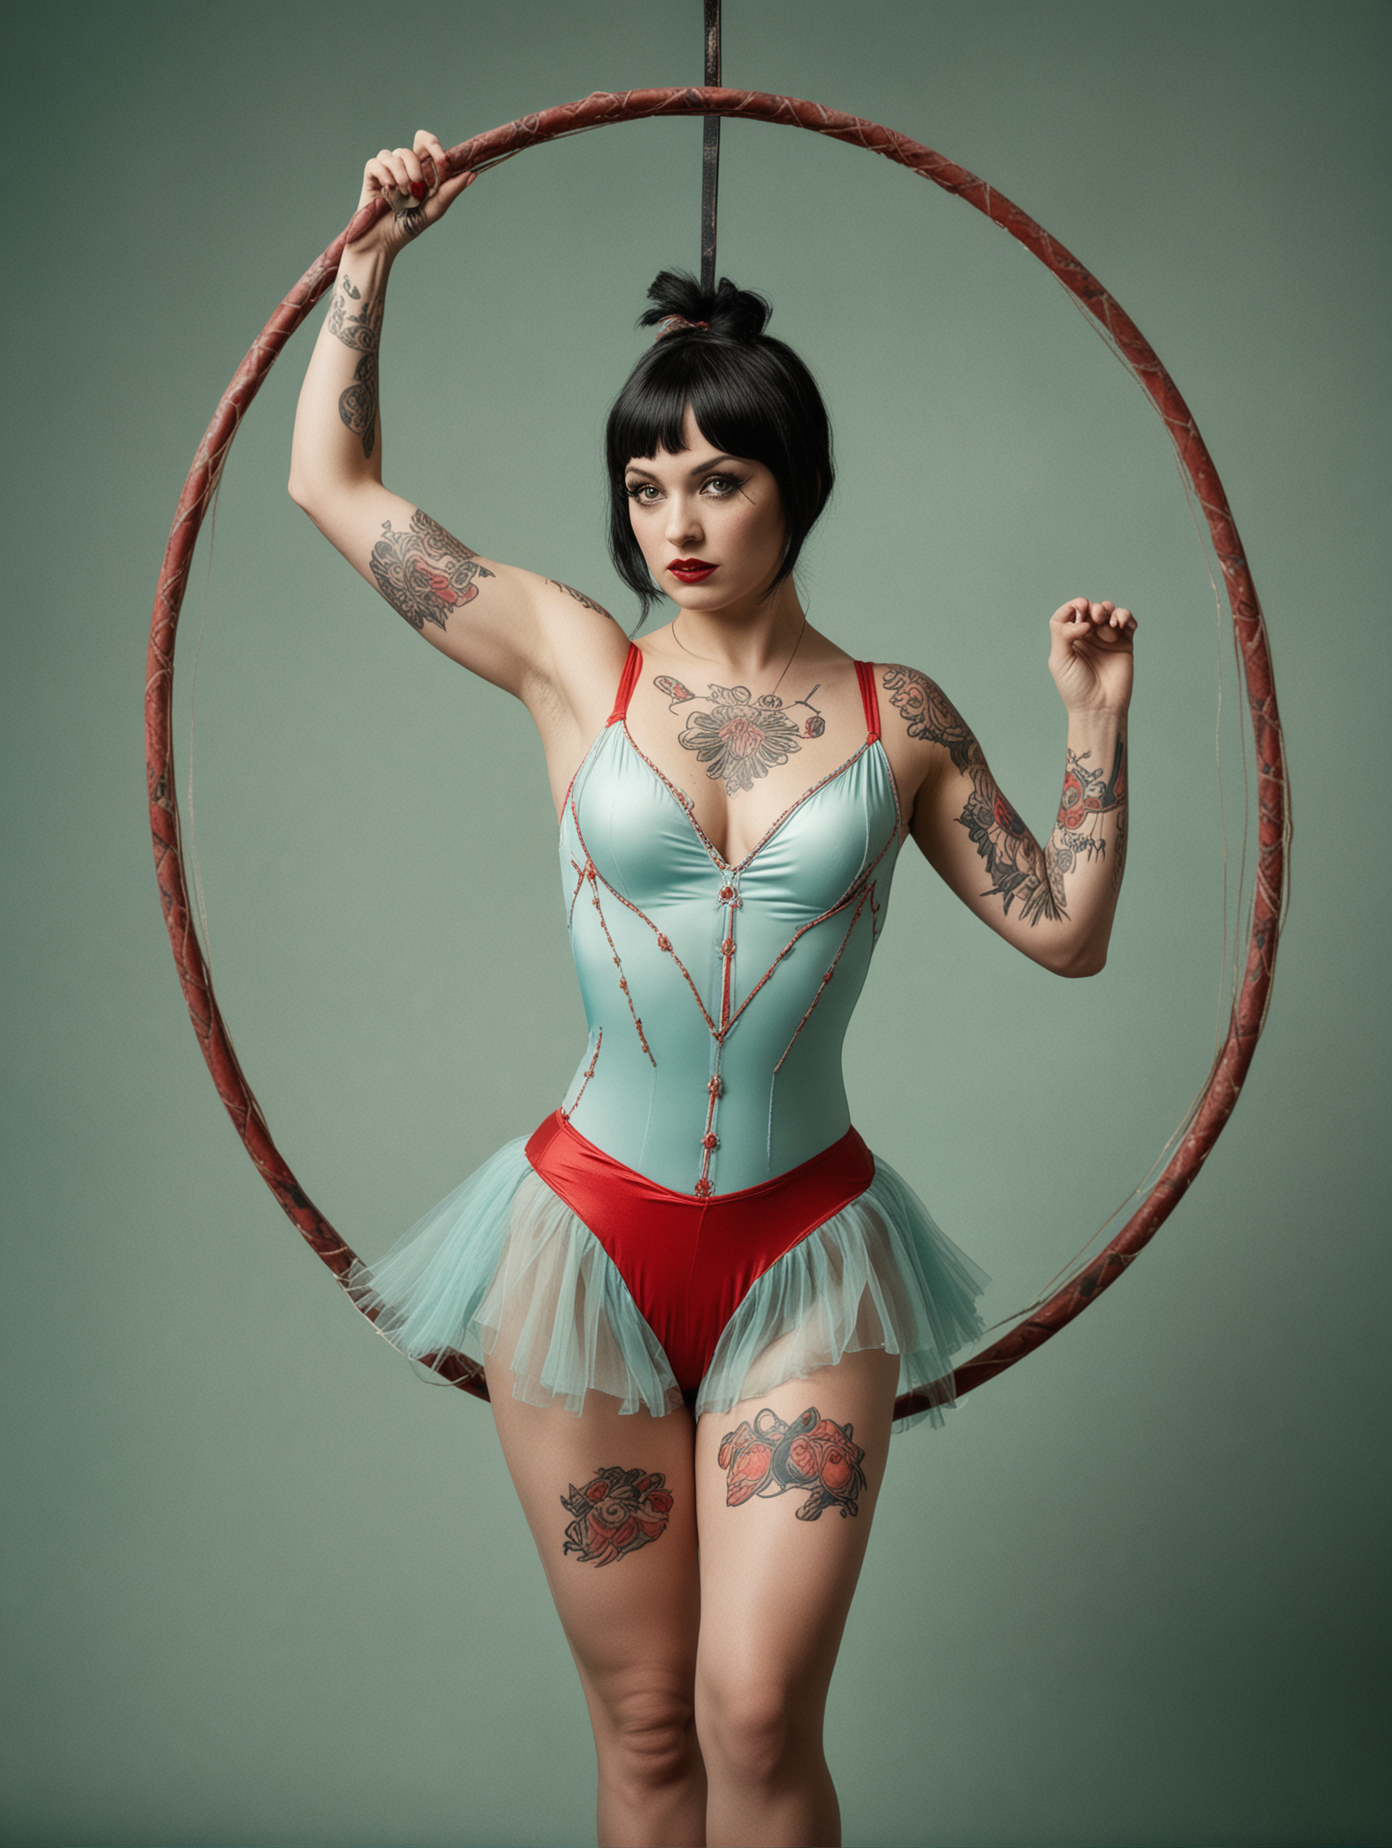 Whimsical Eerie Symbolism 1920s Circus Acrobatics with NatureInspired Tattoos